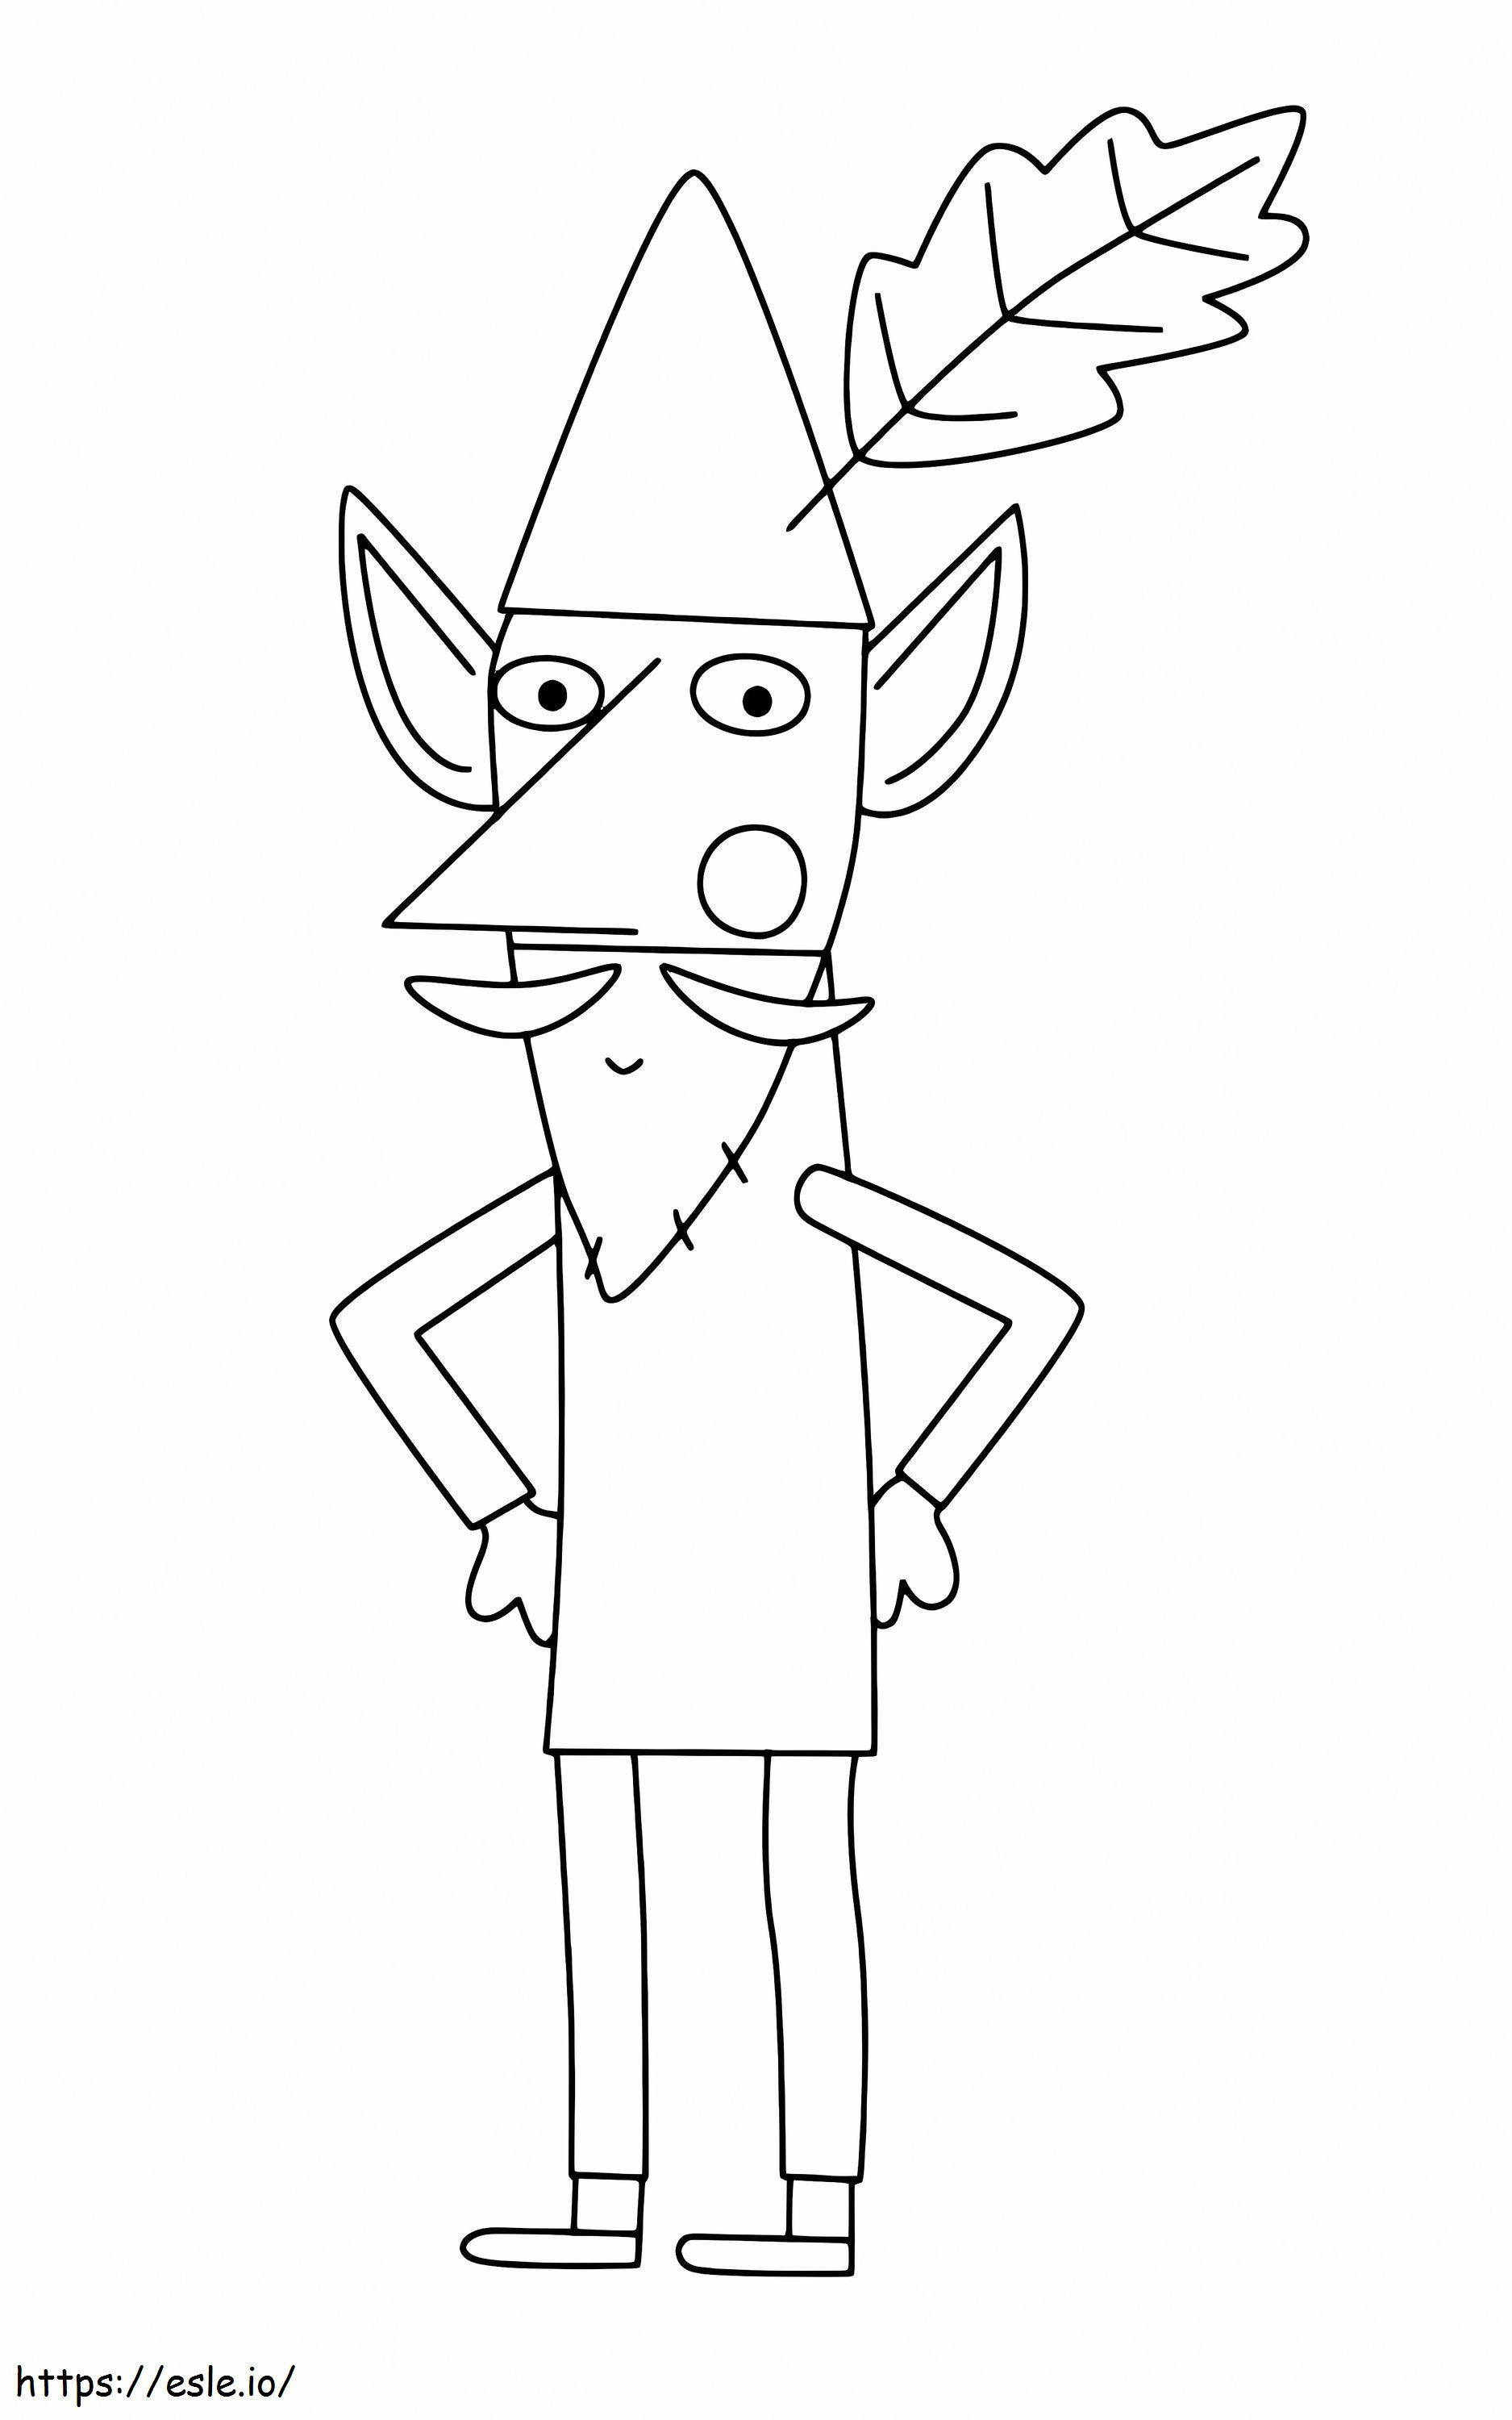 1559532497 Wise Old Elf A4 coloring page